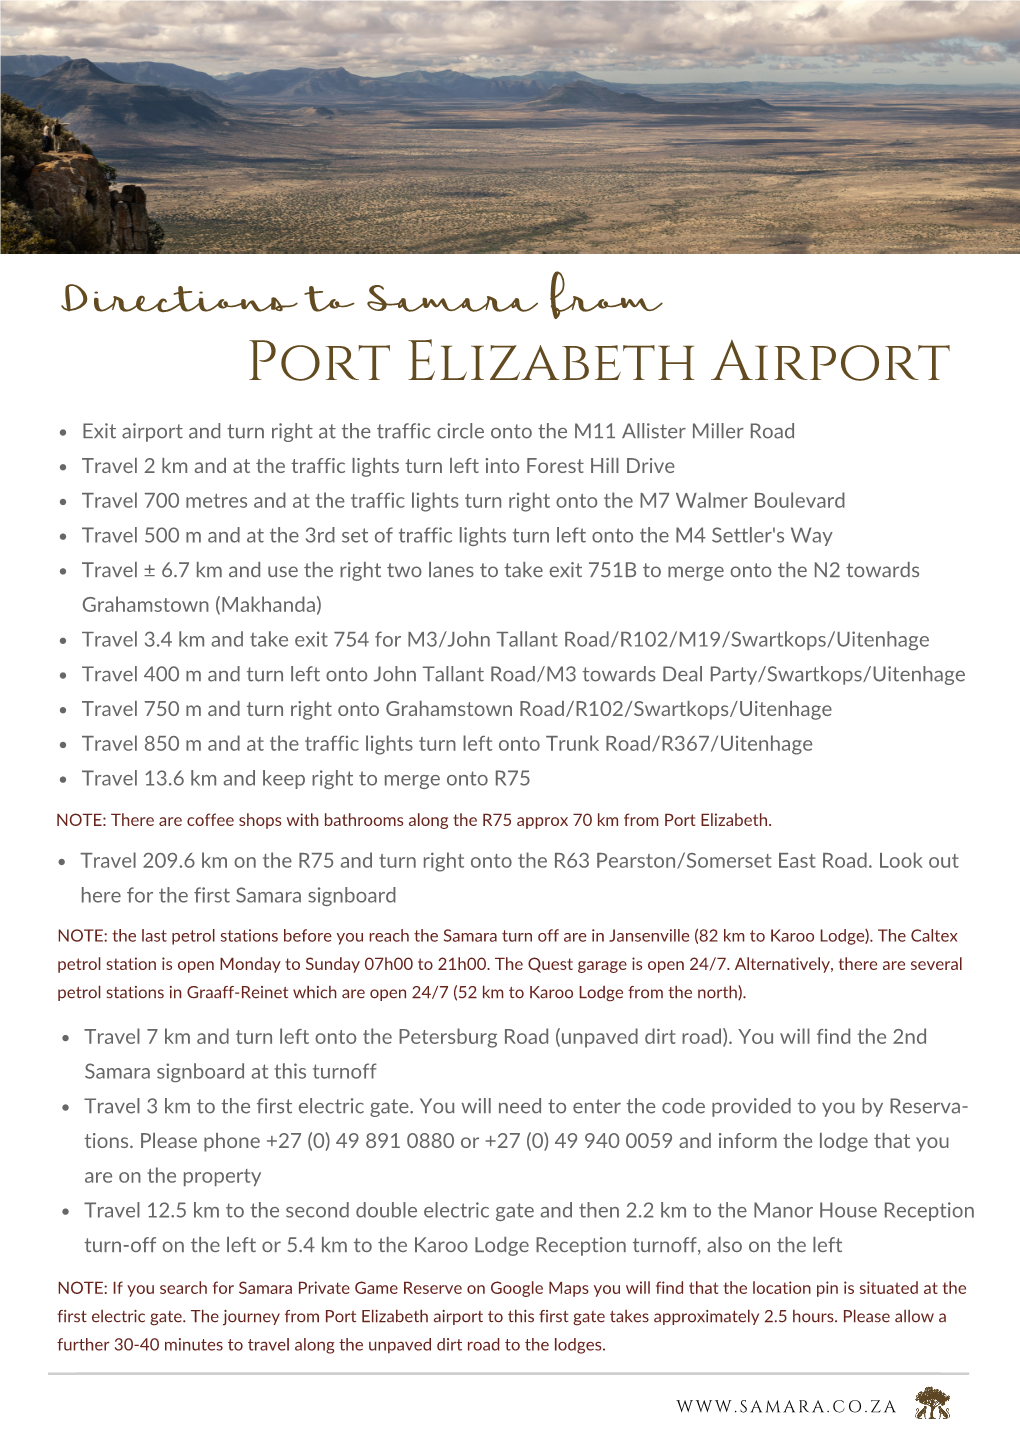 Directions from Port Elizabeth Airport